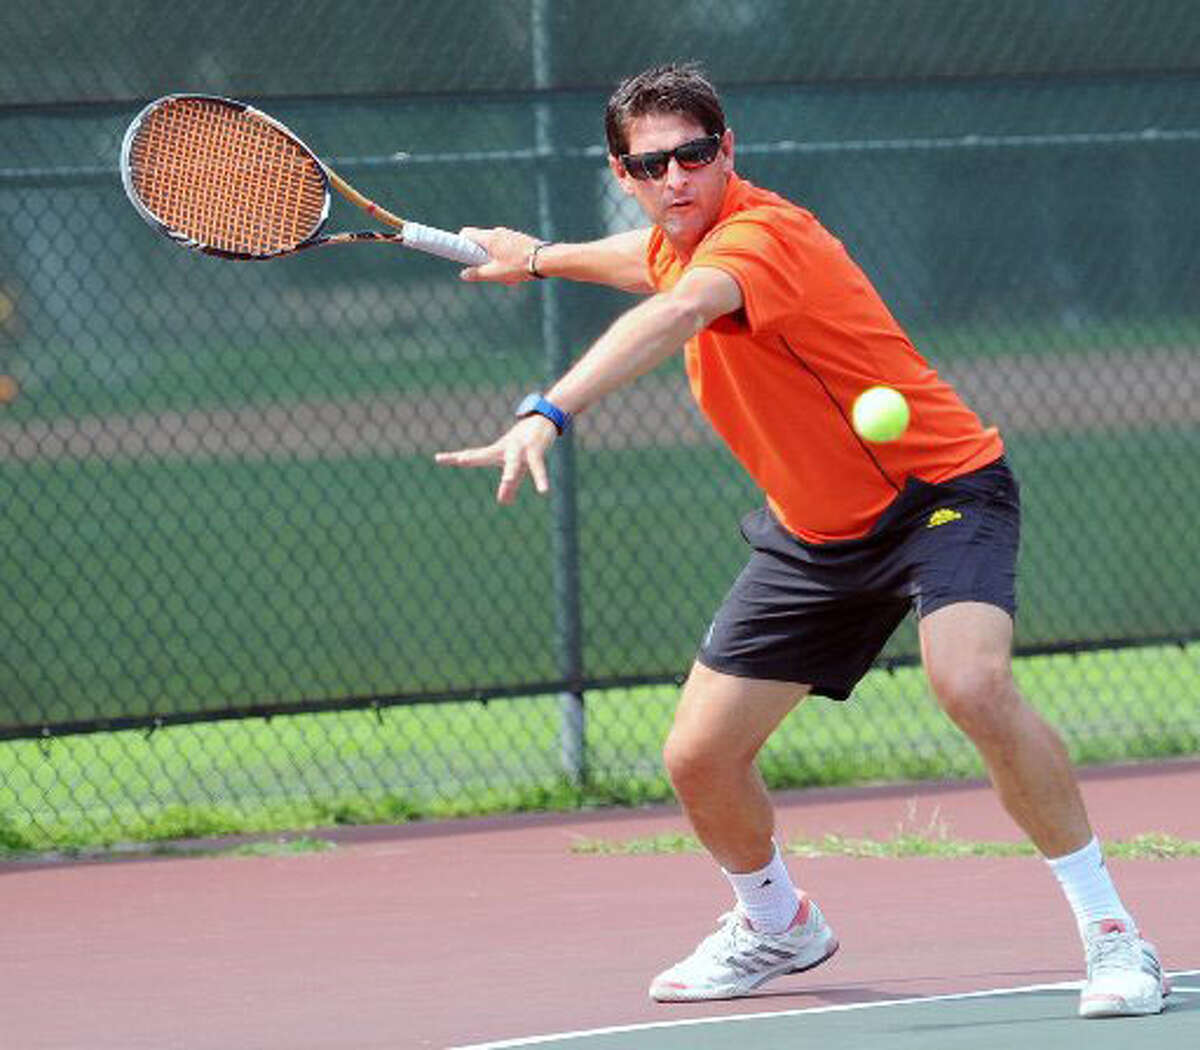 Juan Arraya prepares to hit during the final of the men’s open match during the Greenwich Town Tennis championships at Binney Park in Old Greenwich on Aug. 1. Arraya, an Old Greenwich resident, will be playing with Stamford resident Max Le Pivert in the upcoming National Platform Tennis Tournament at Country Club of Darien this weekend.